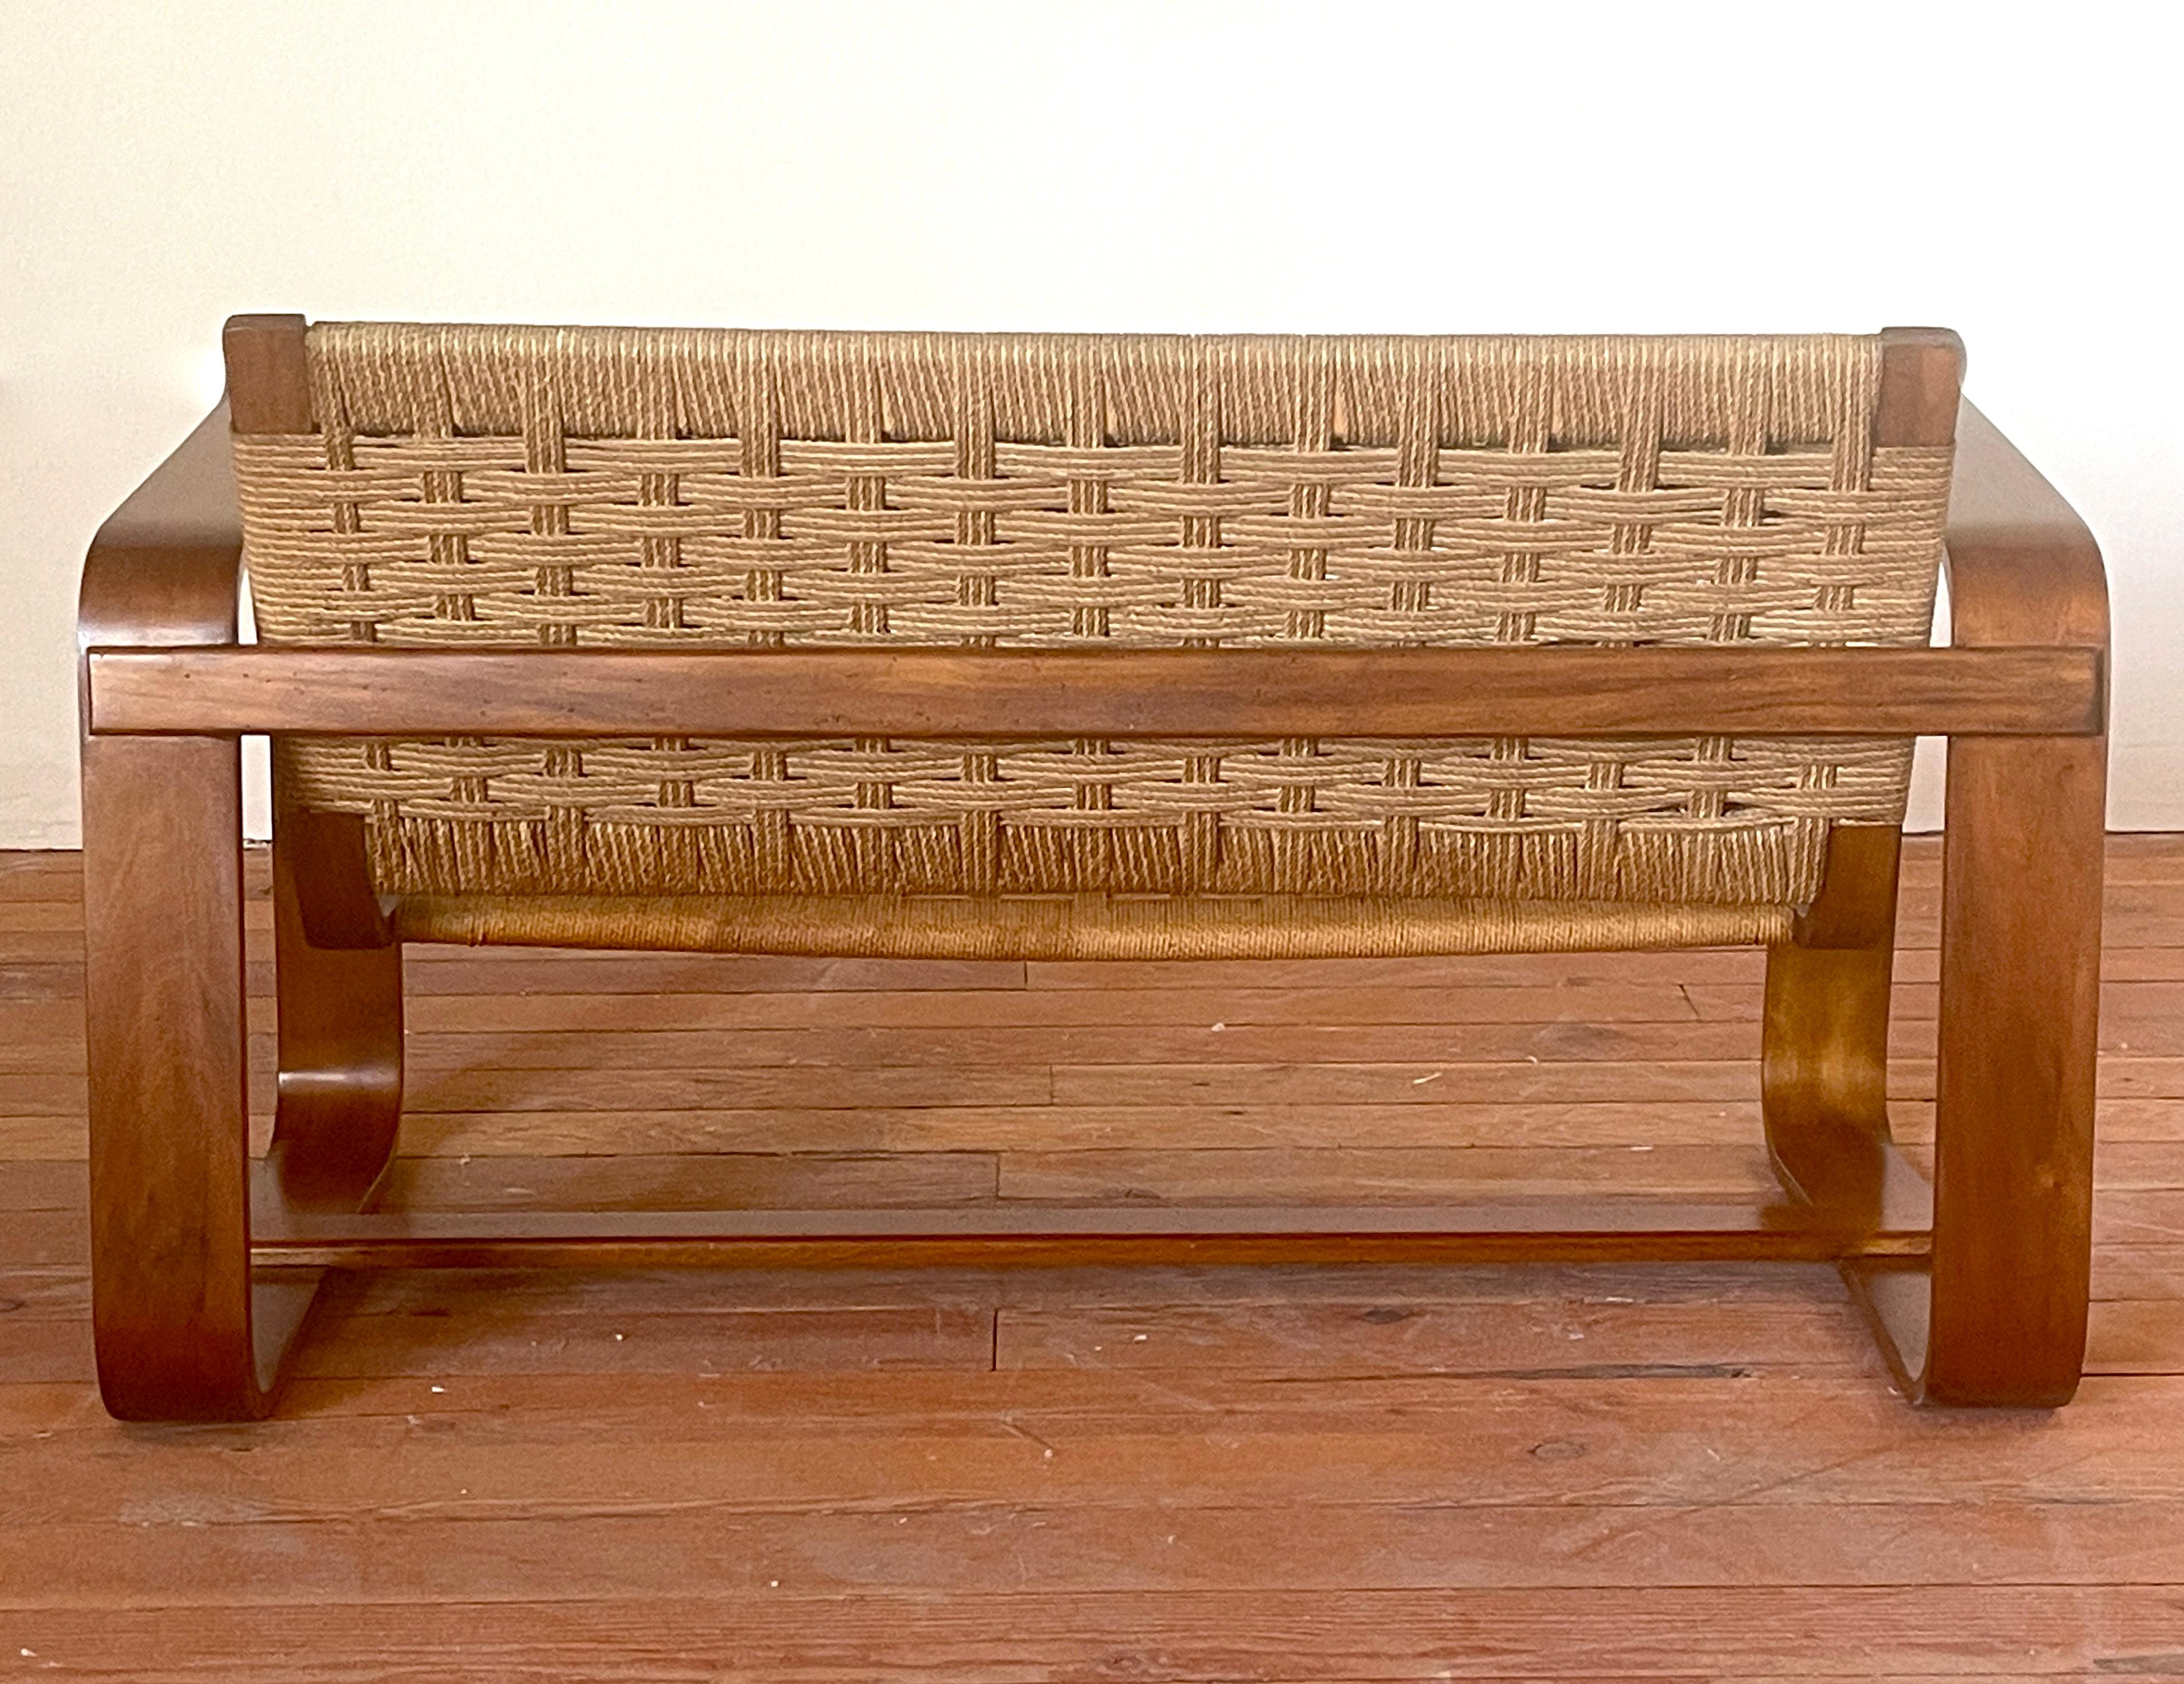 Guiseppe Pagano Pogatschnig Bench, 1939 For Sale 9